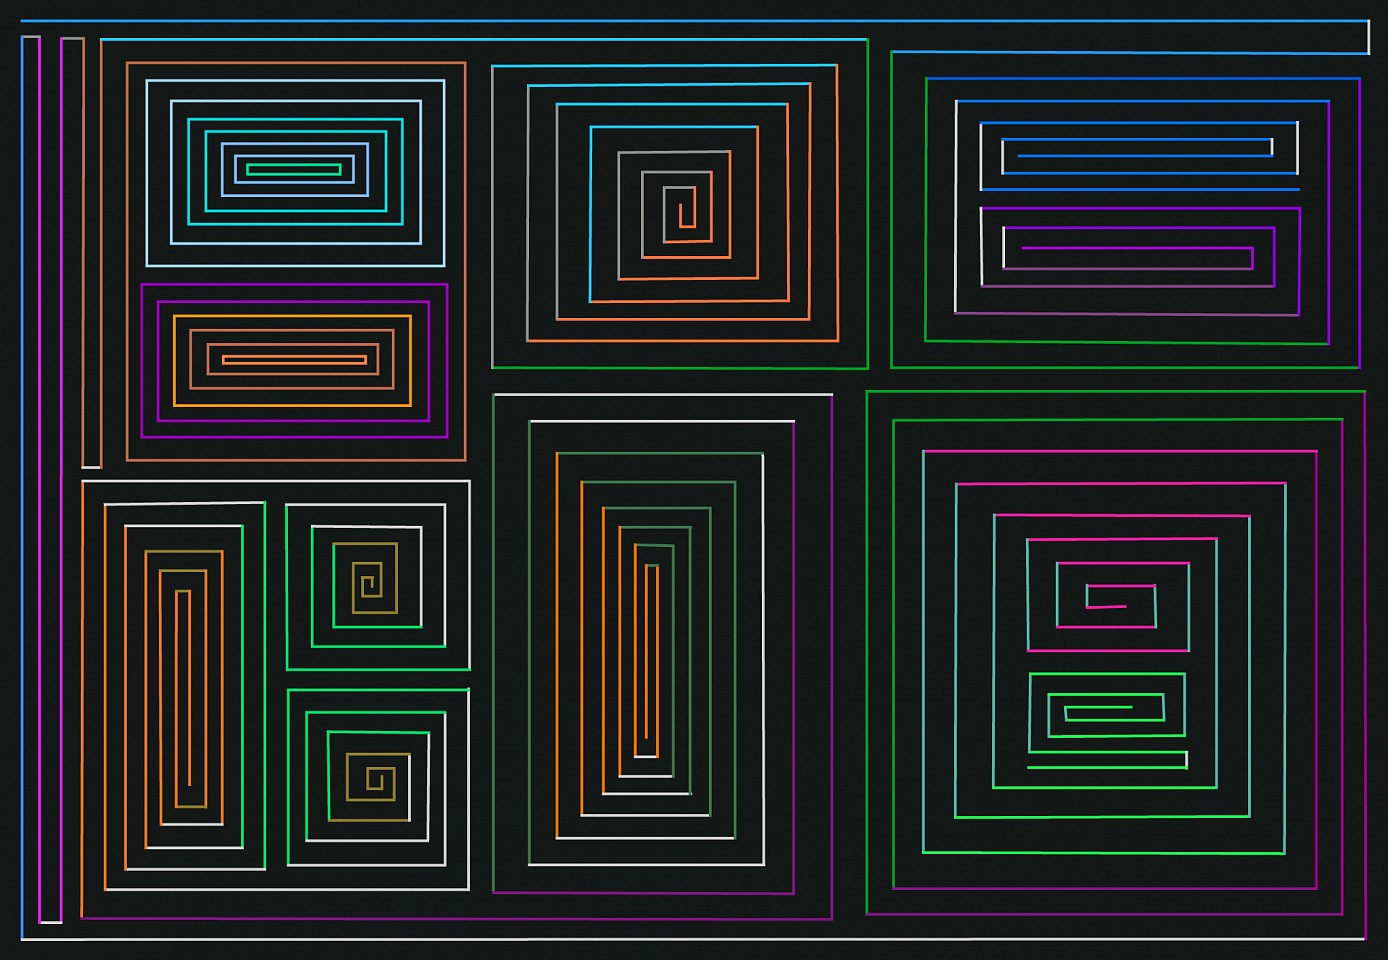 Dane Albert, Color Sticks #7 Night, 2023
Acrylic on canvas (Concept), 48 x 72 in. (121.9 x 182.9 cm)
Series of colored lines and shapes in multiple configurations
DA.2023.sticks-007-night